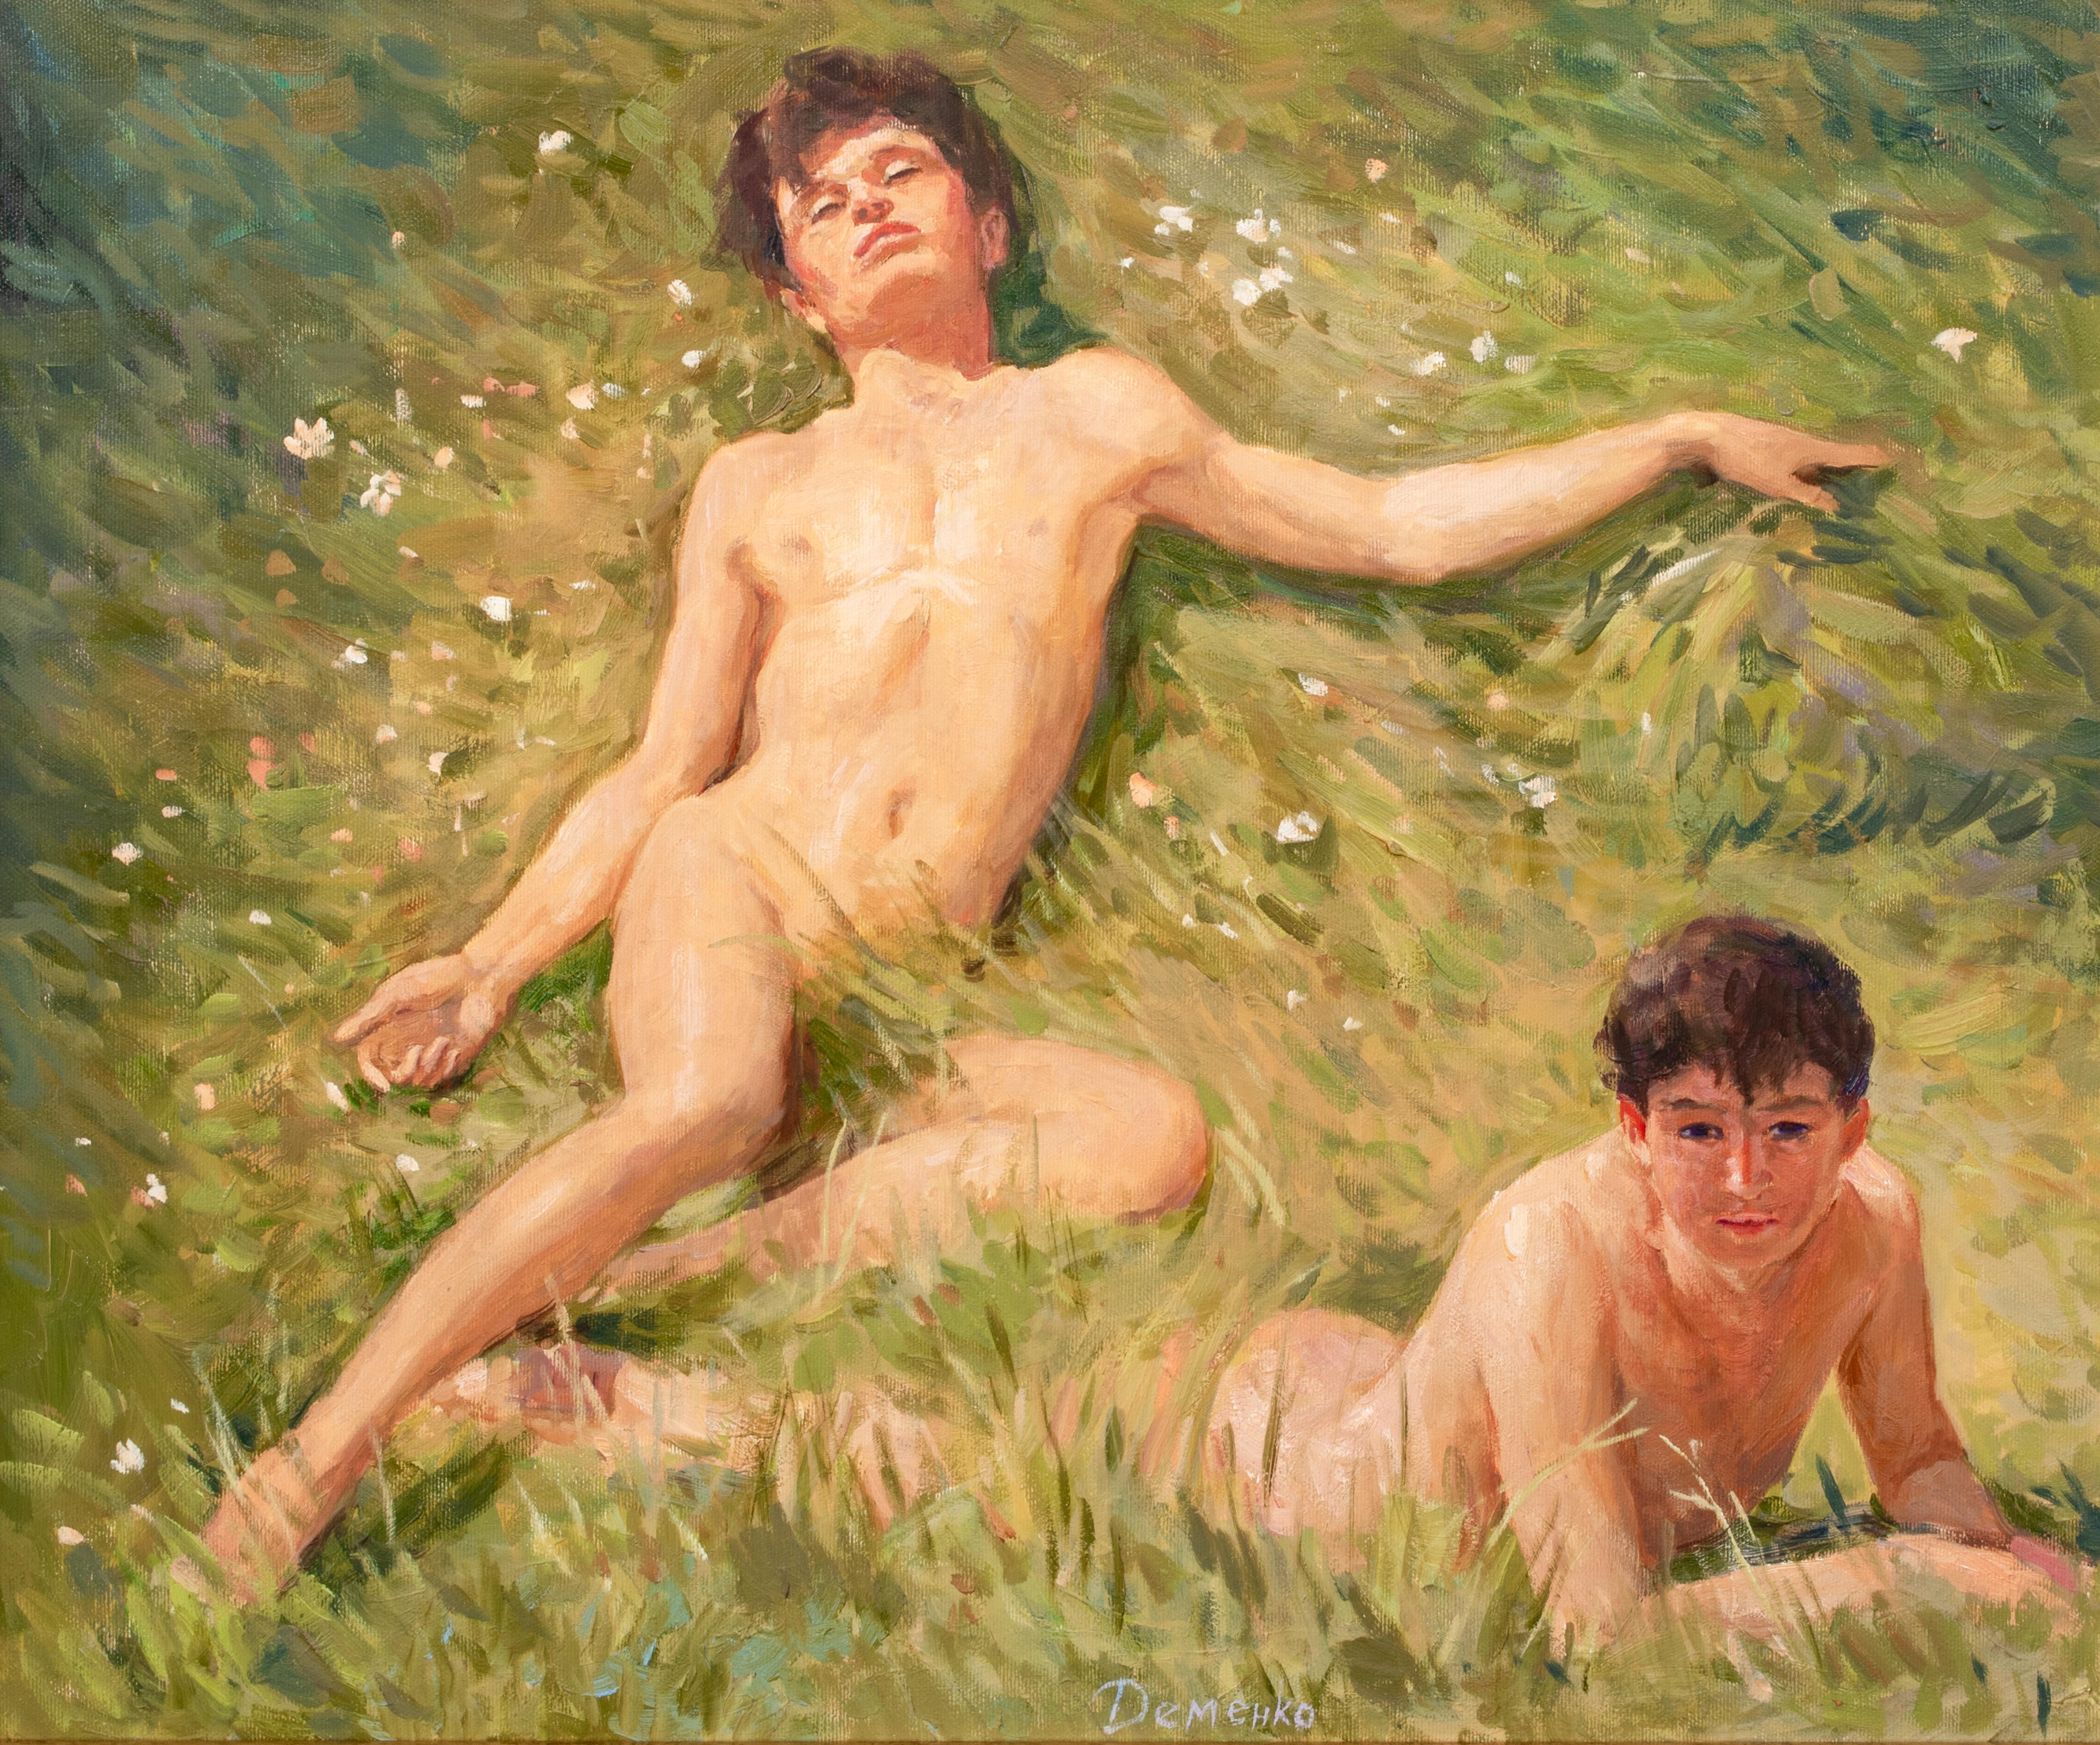 Nude Boys In The Summer Grass

signed and inscribed verso

Large European School portrait of two nude boys resting in the sunlit long grass, oil on canvas. Excellent quality and condition, signed and dated. Presented in its original frame.